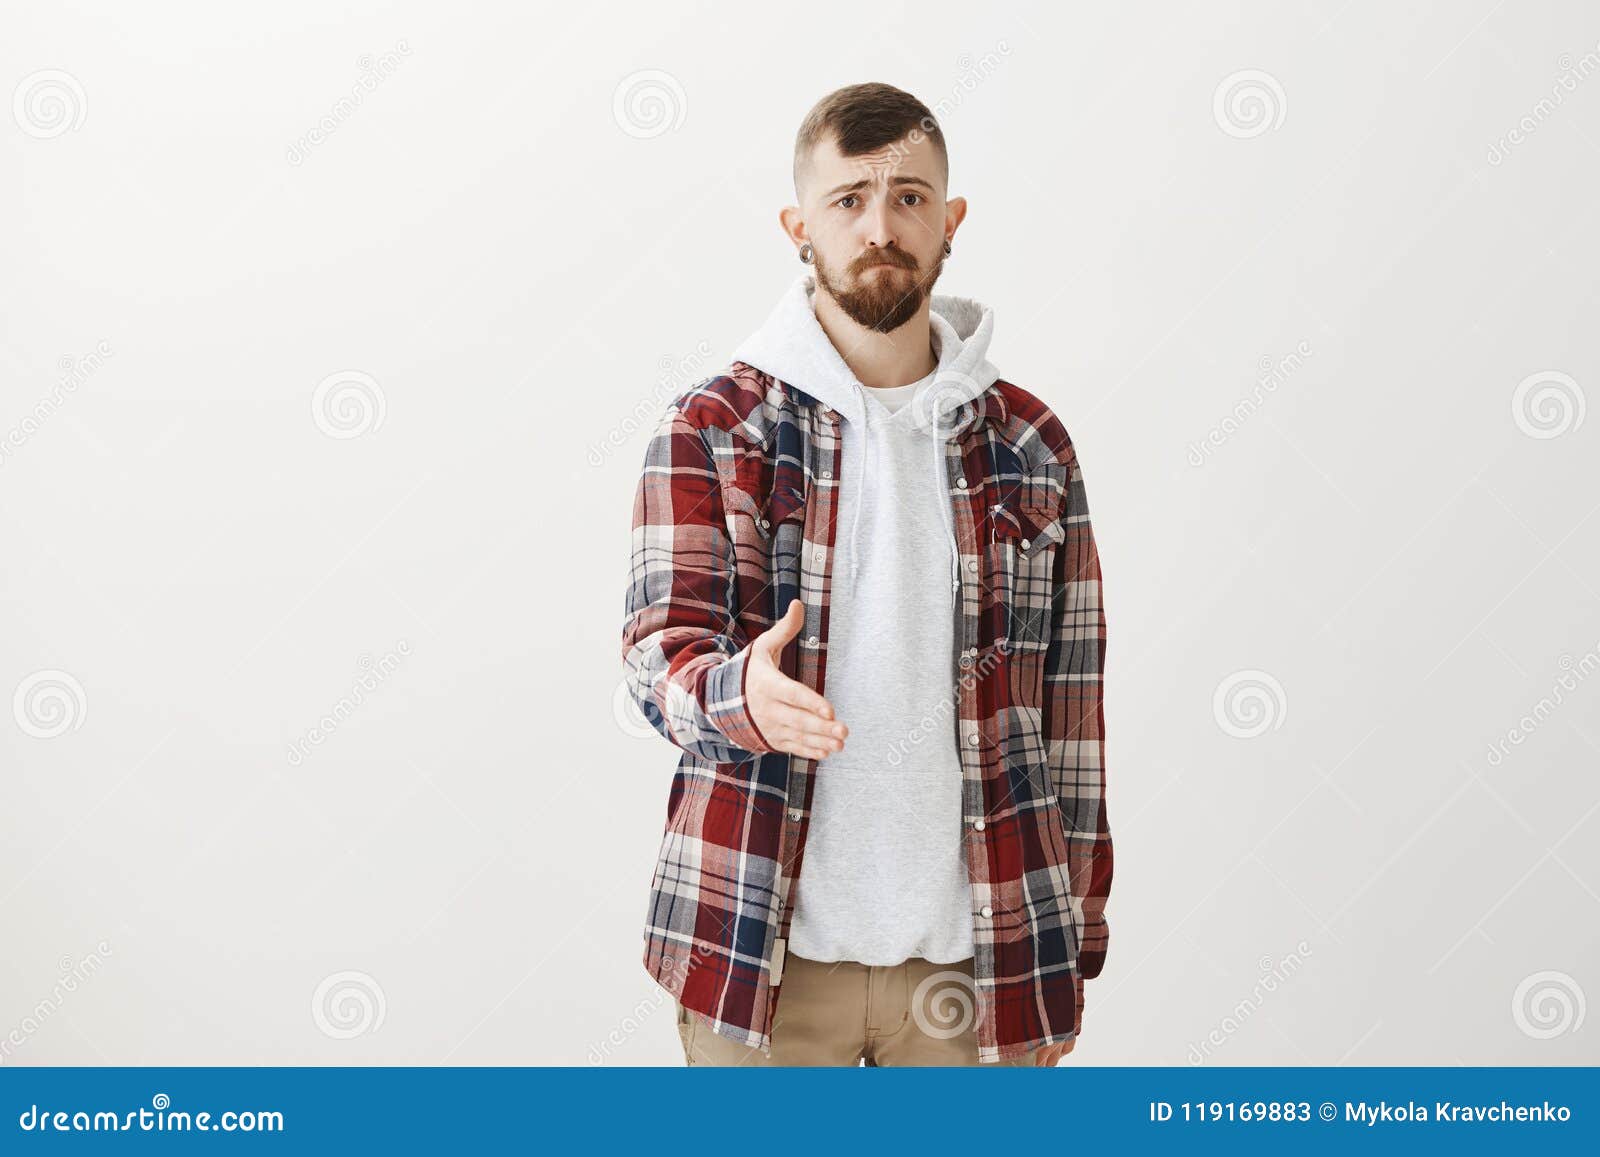 Studio Shot of Gloomy Unconfident European Guy with Fair Hair in Trendy Plaid Shirt Over Hoodie, Pulling Towards Stock - Image of advertising, emotional: 119169883